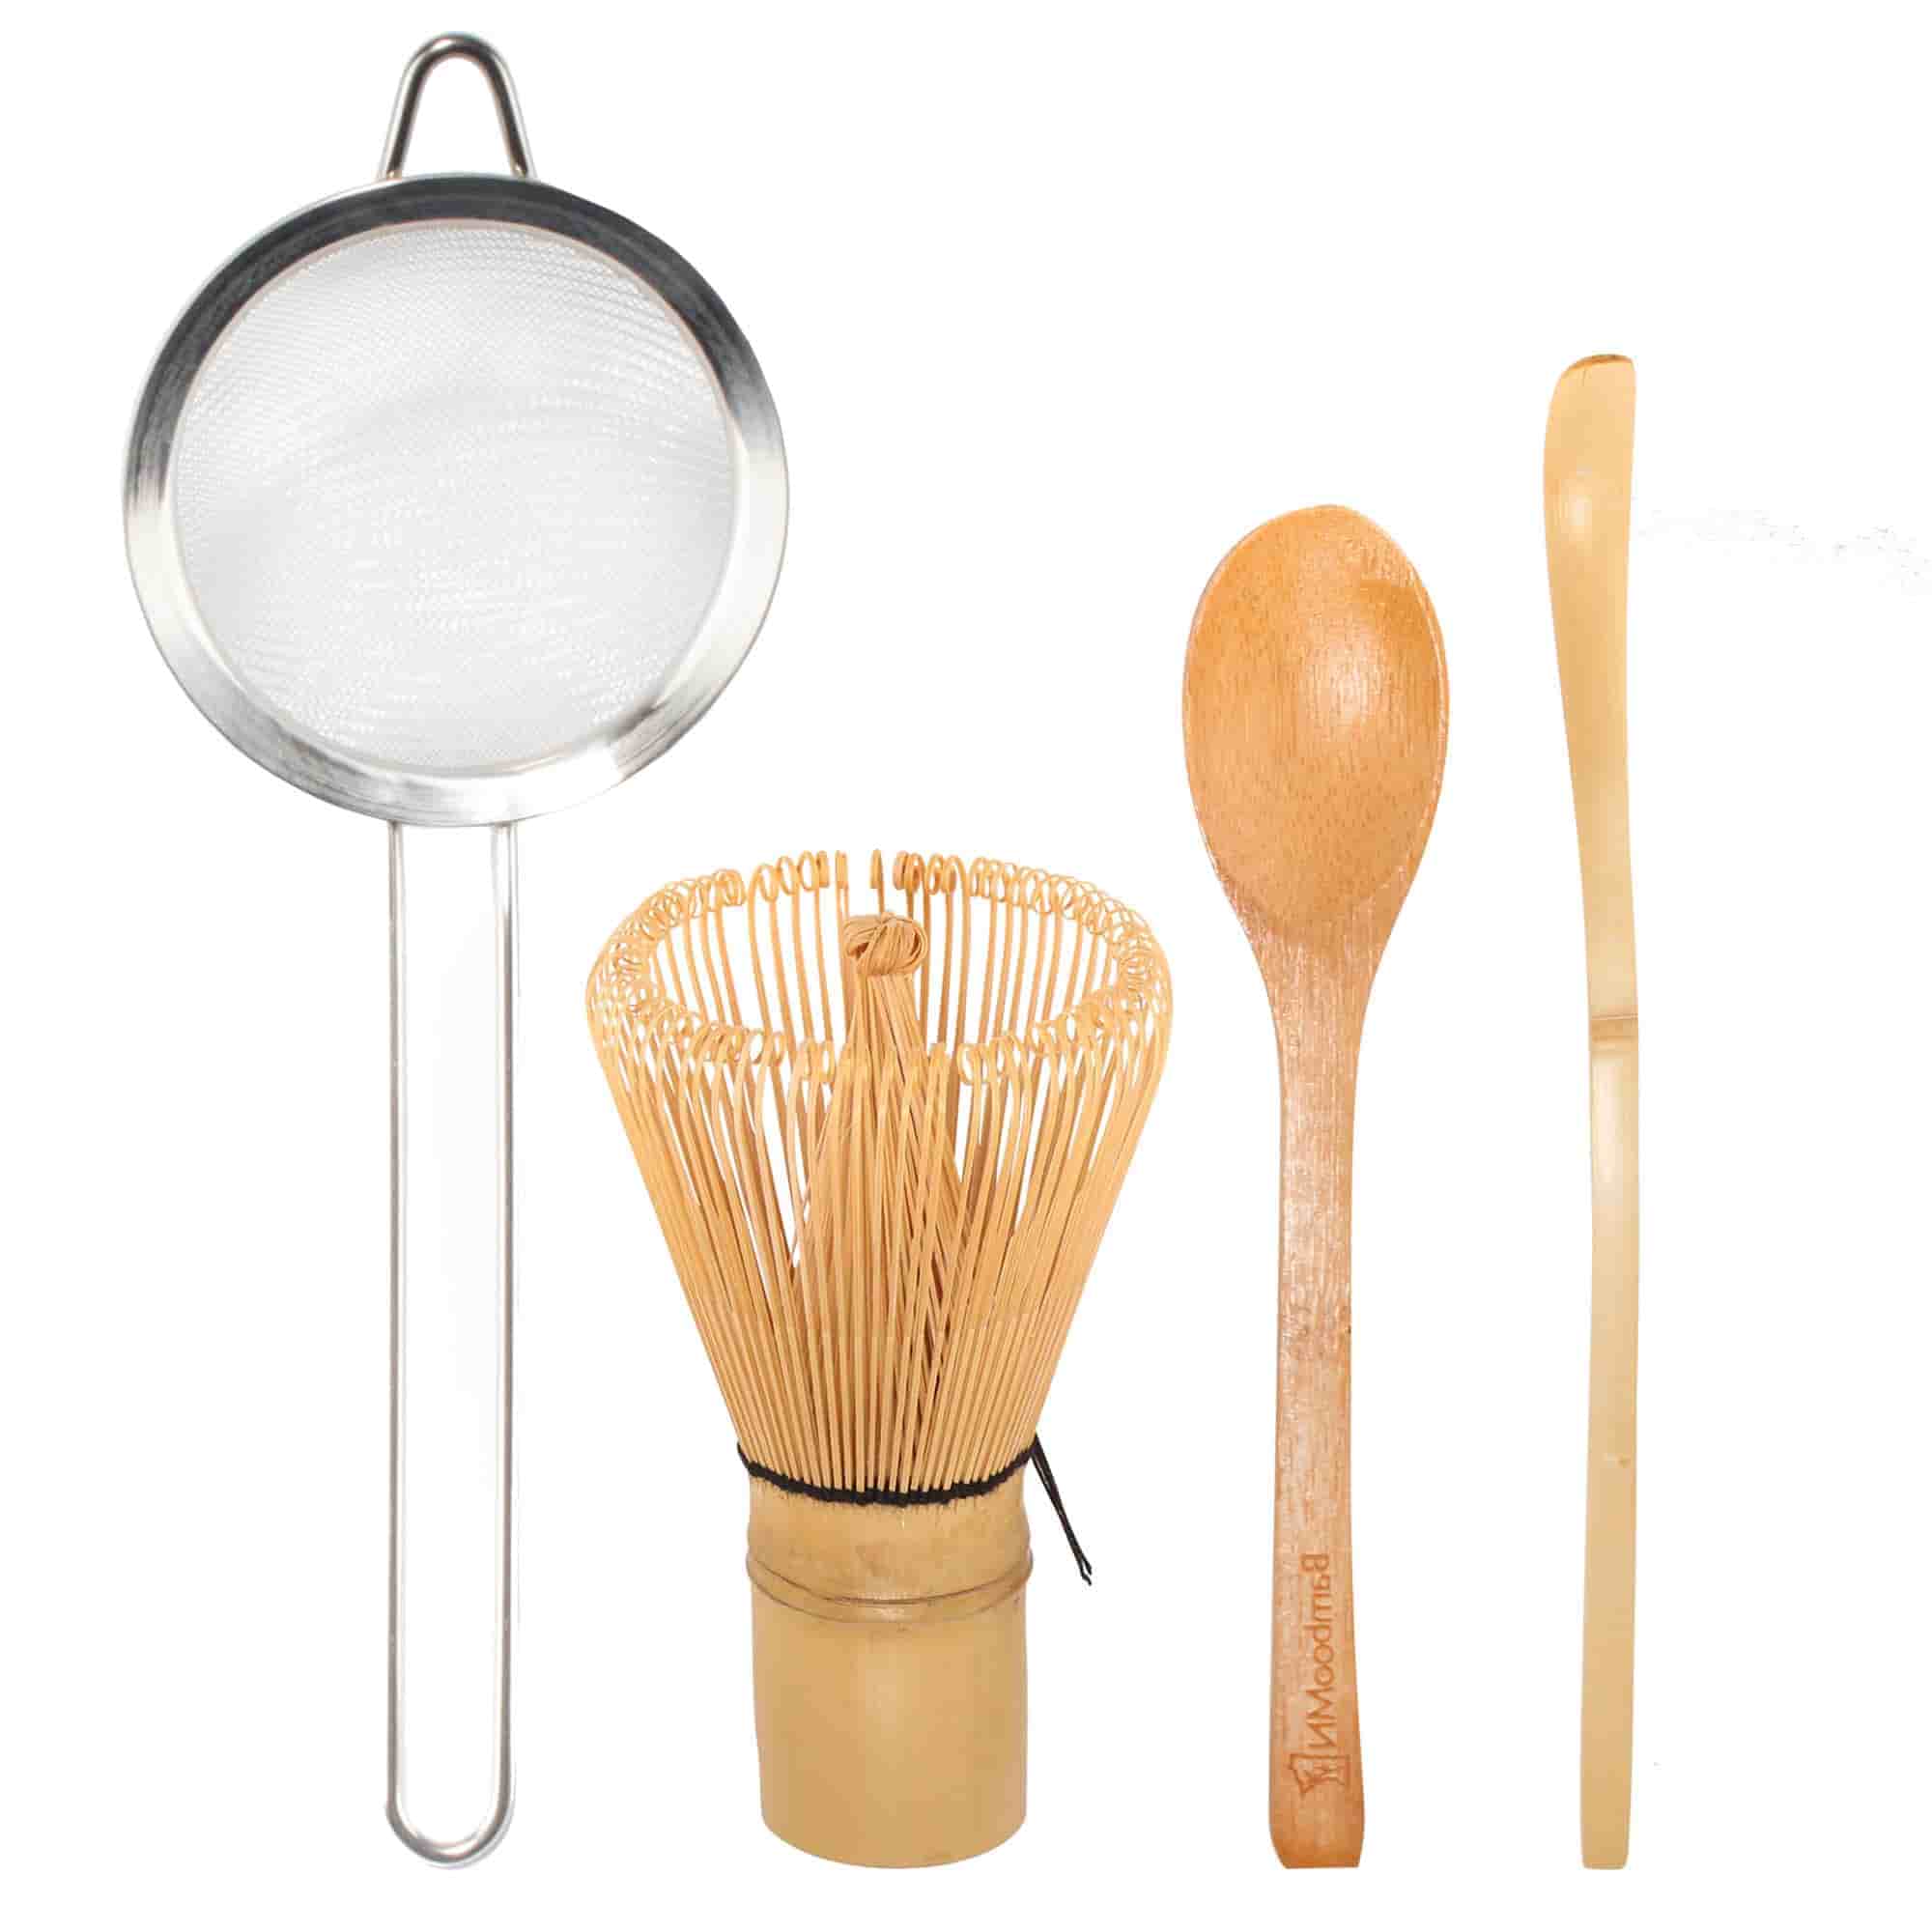 moHA! - MoHA! 3-in-1 Whisk, Tong and Strainer